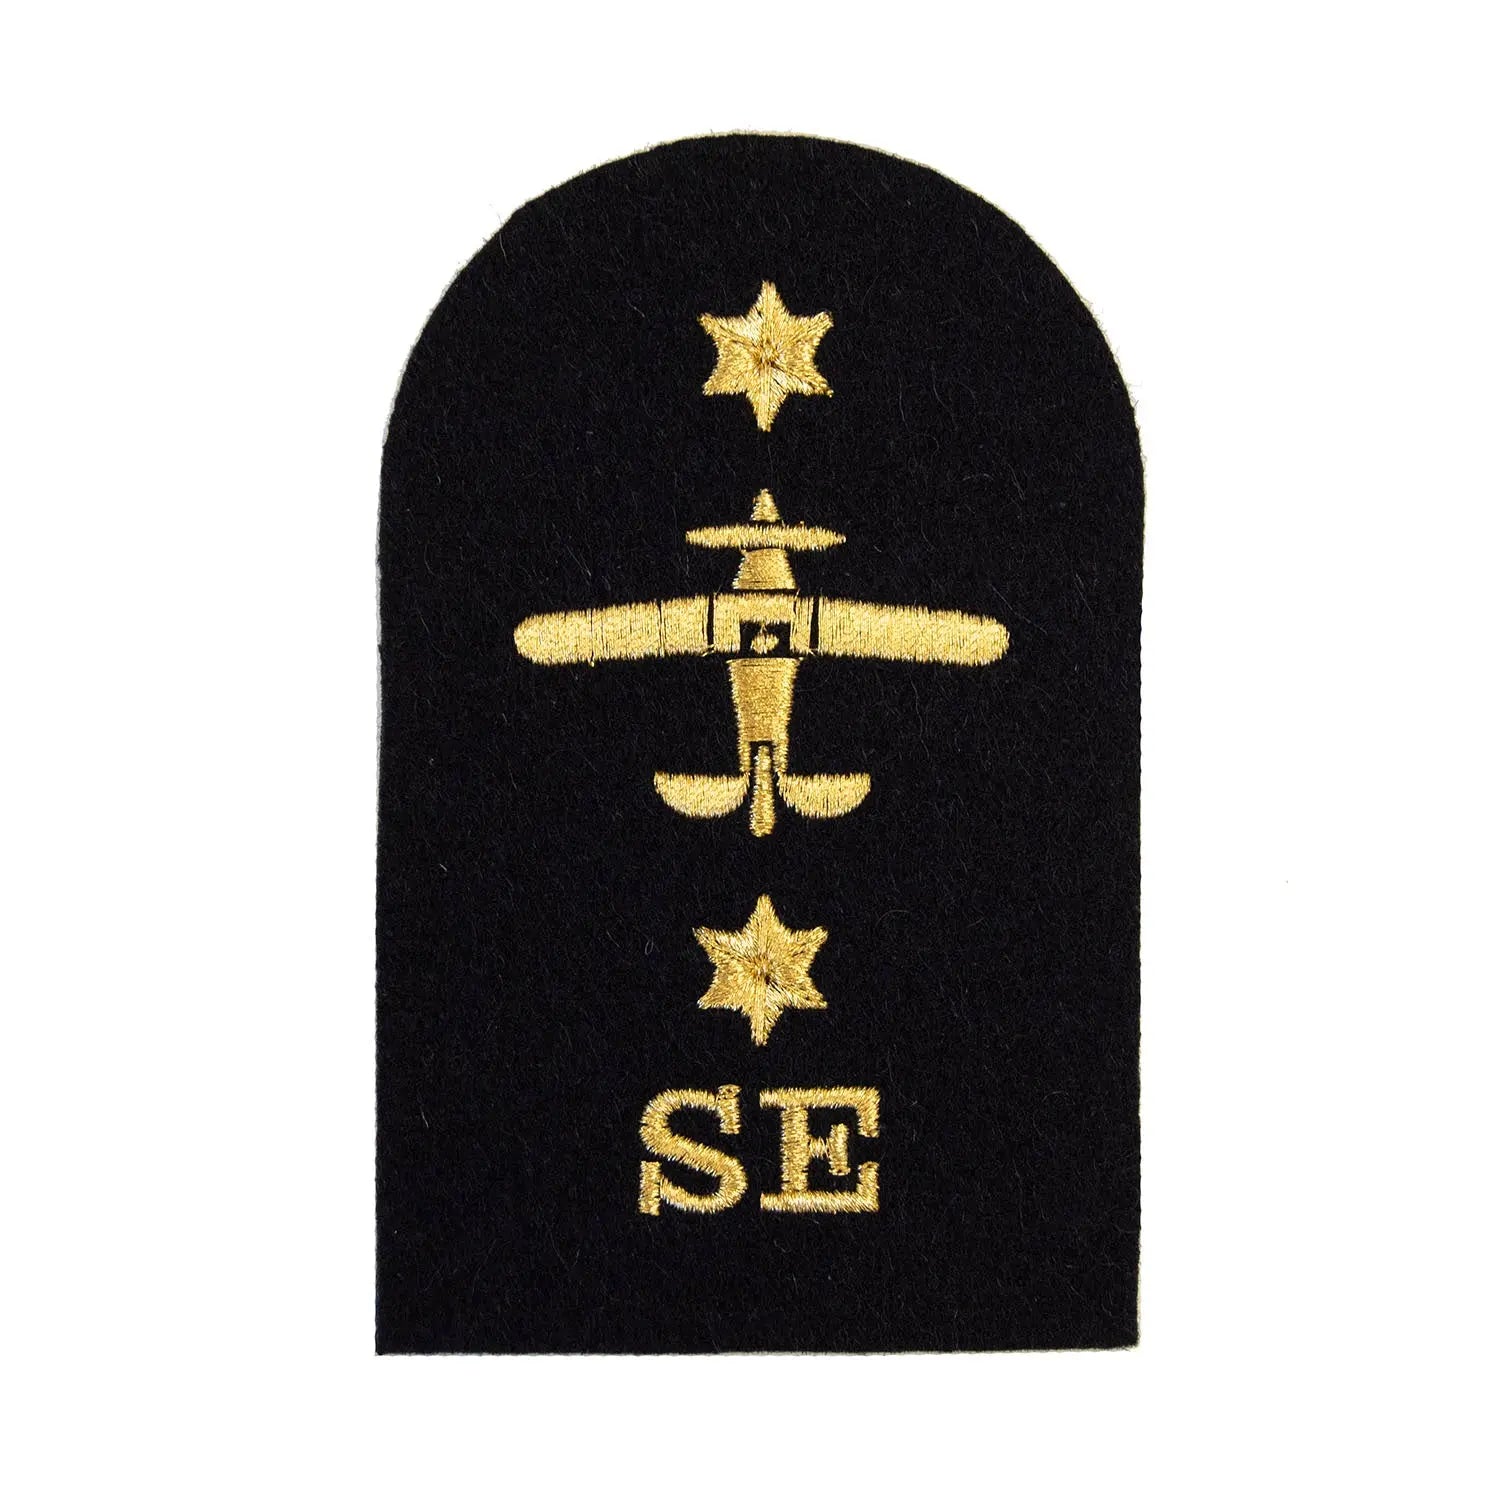 Survival Equipment (SE) Leading Rate Royal Navy Badges wyedean